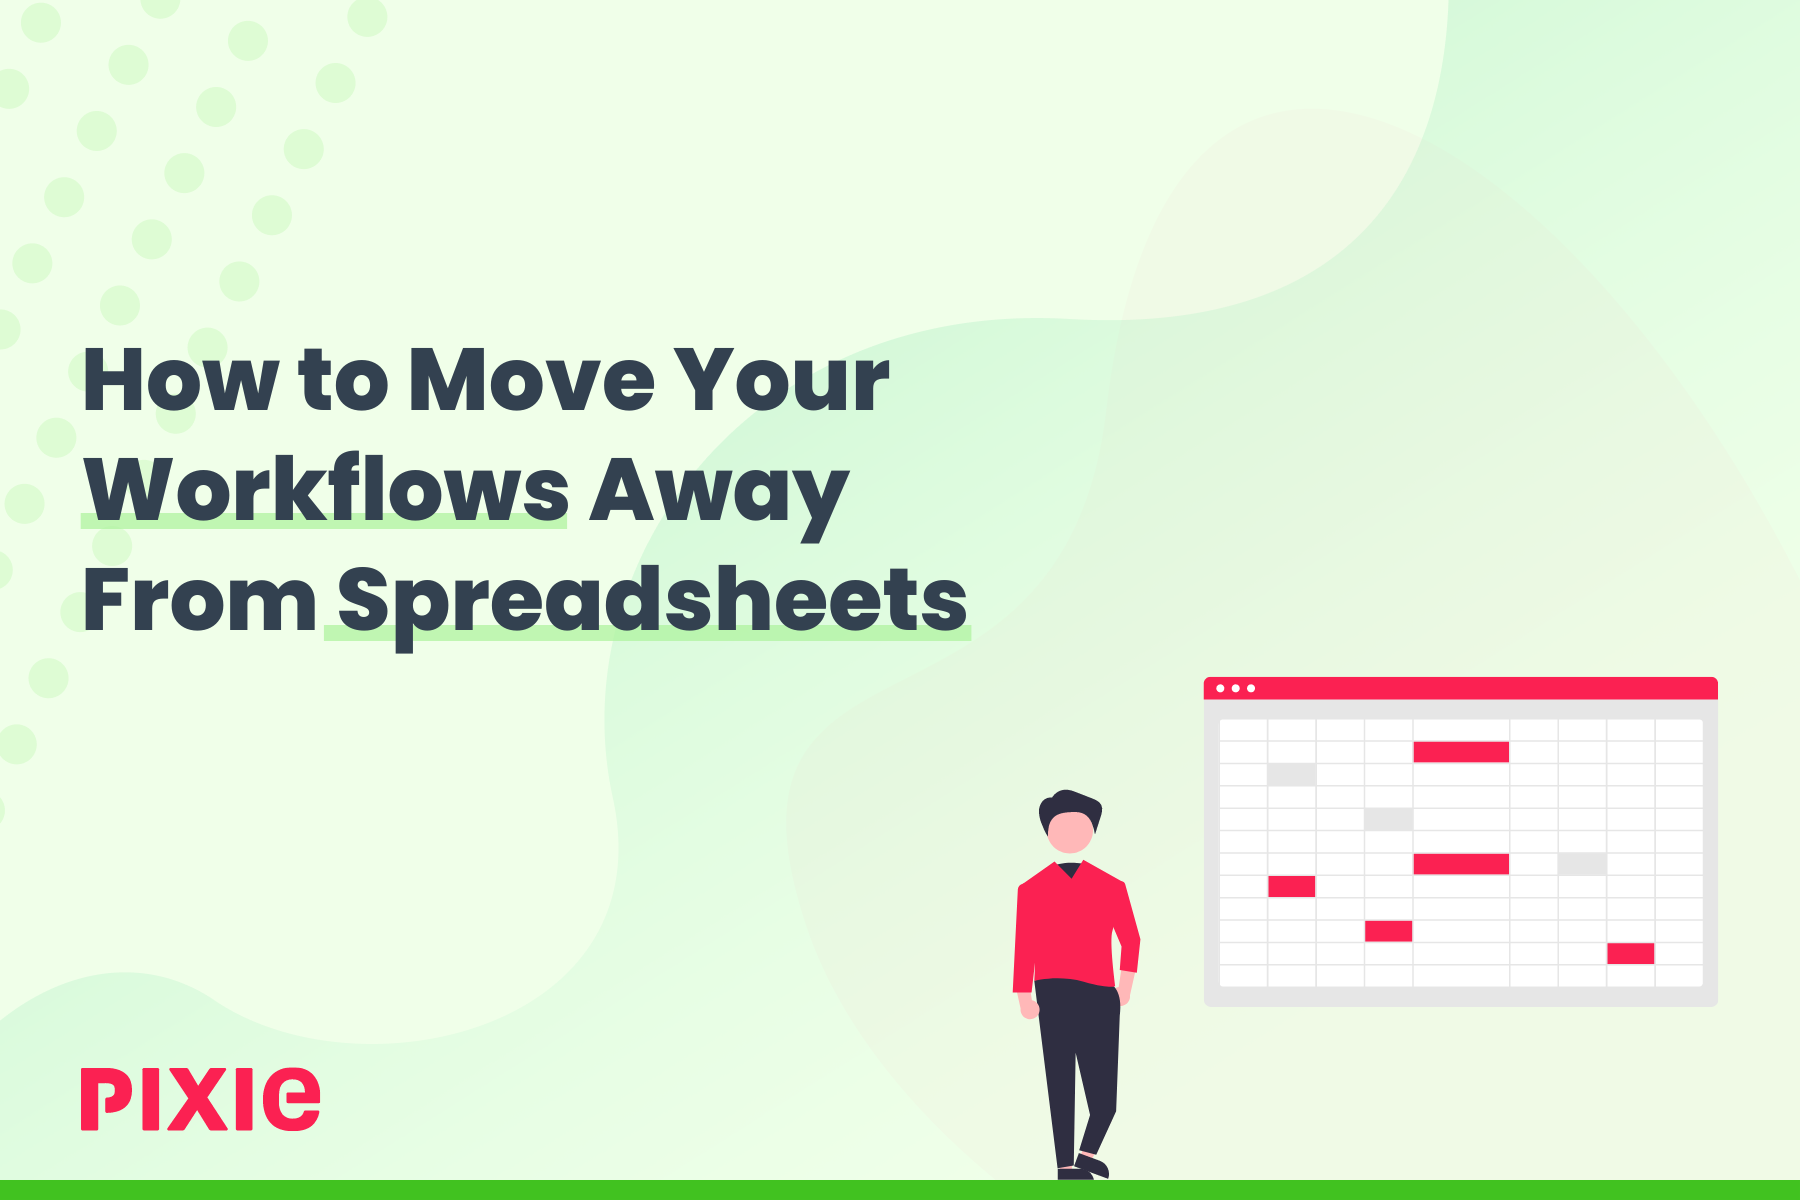 Guide: Stop Using Spreadsheets for Workflow Management